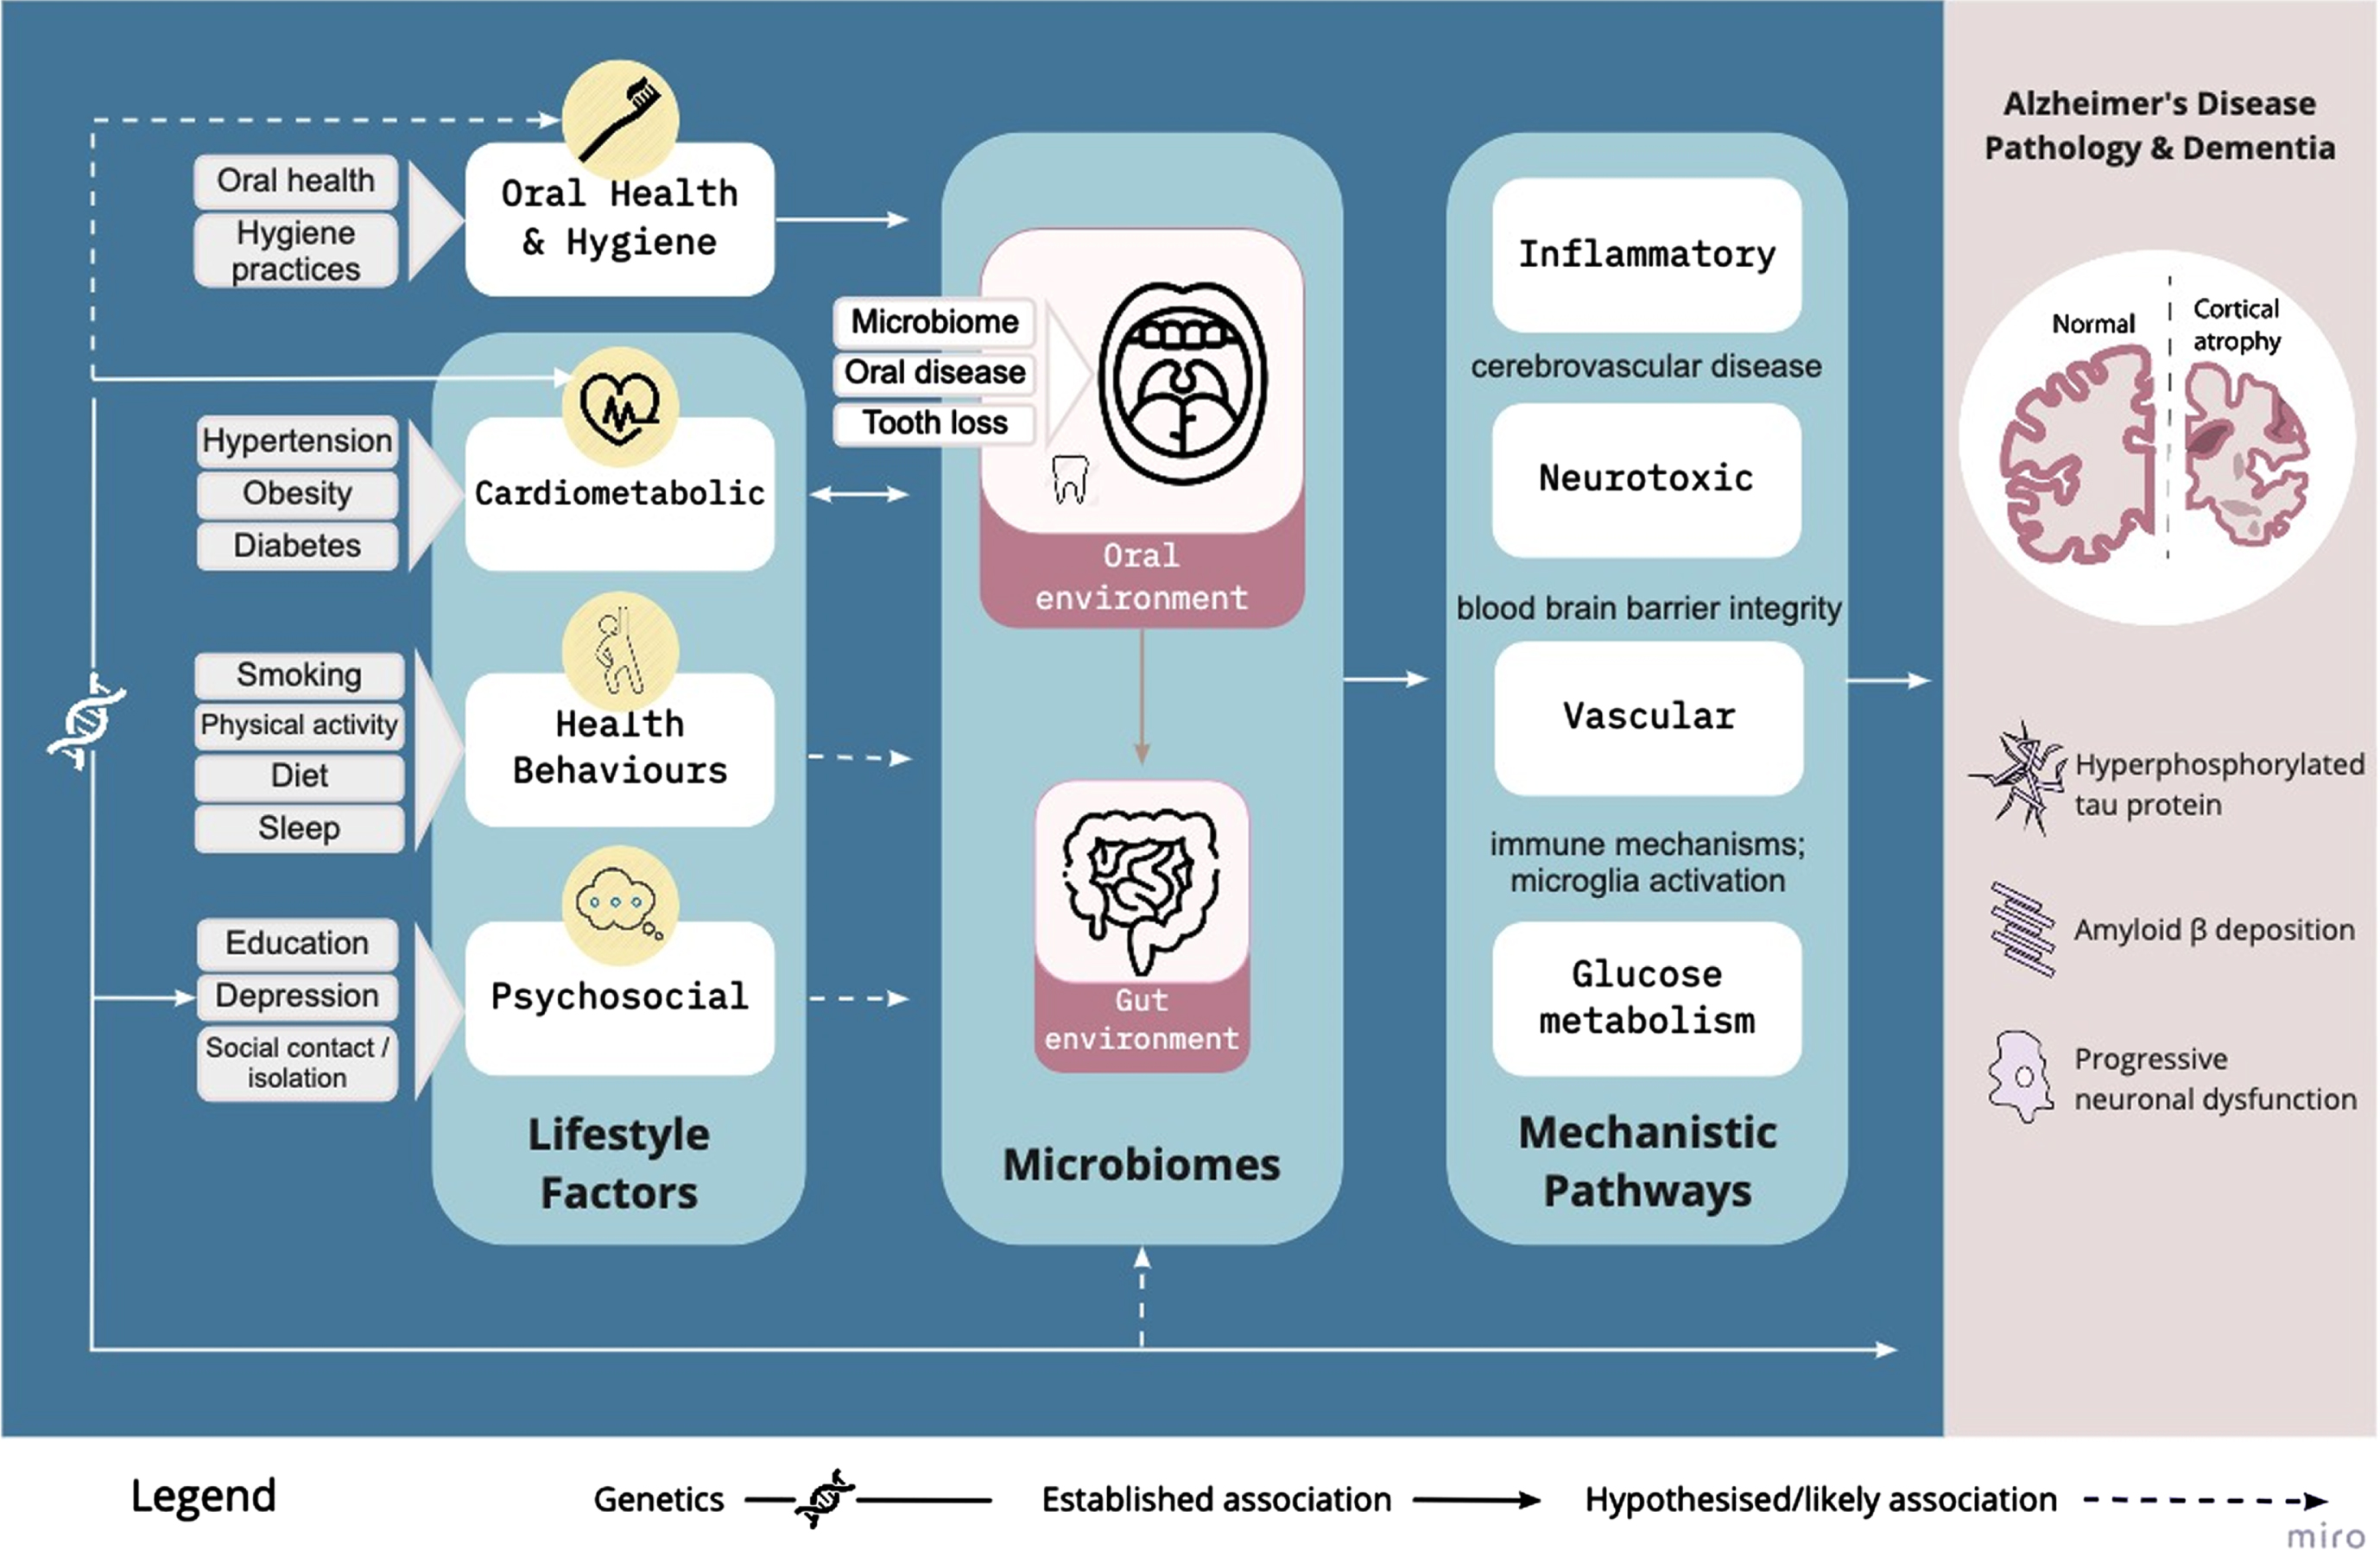 Conceptual framework in which the oral microbiome is a plausible causal intermediary between established lifestyle factors and AD risk, via vascular, inflammatory/immune, neurotoxic, and glucose metabolism pathways. The weight of the connecting lines reflect the strength of evidence linking the lifestyle factors to the oral microbiome, and we propose that oral health and hygiene warrants consideration as an additional risk modifier.